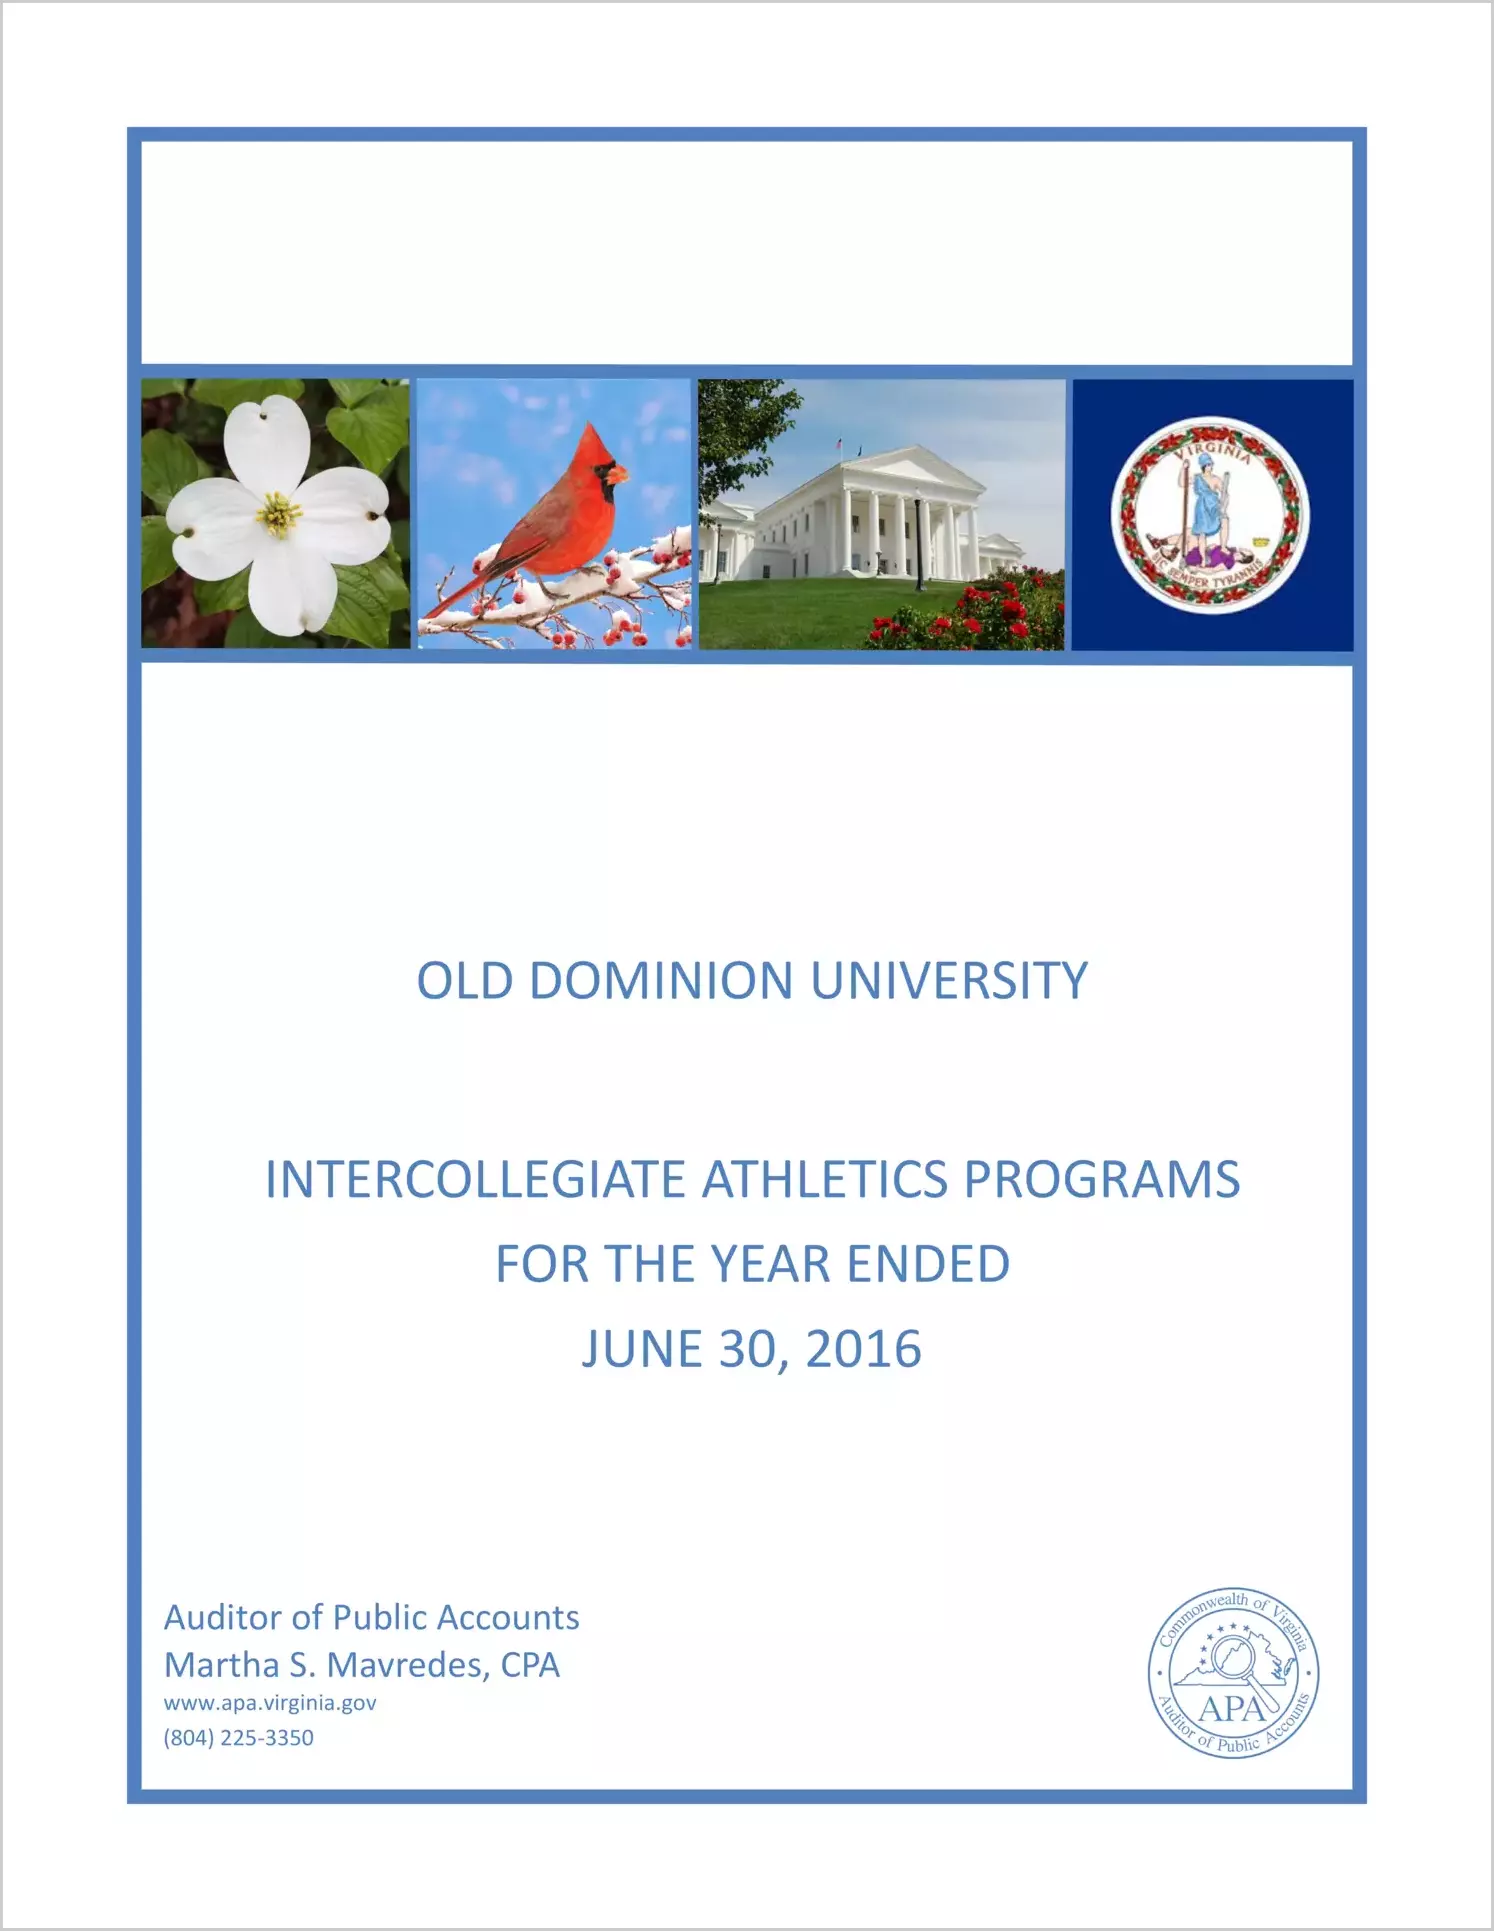 Old Dominion University Intercollegate Athletics Programs for the year ended June 30, 2016